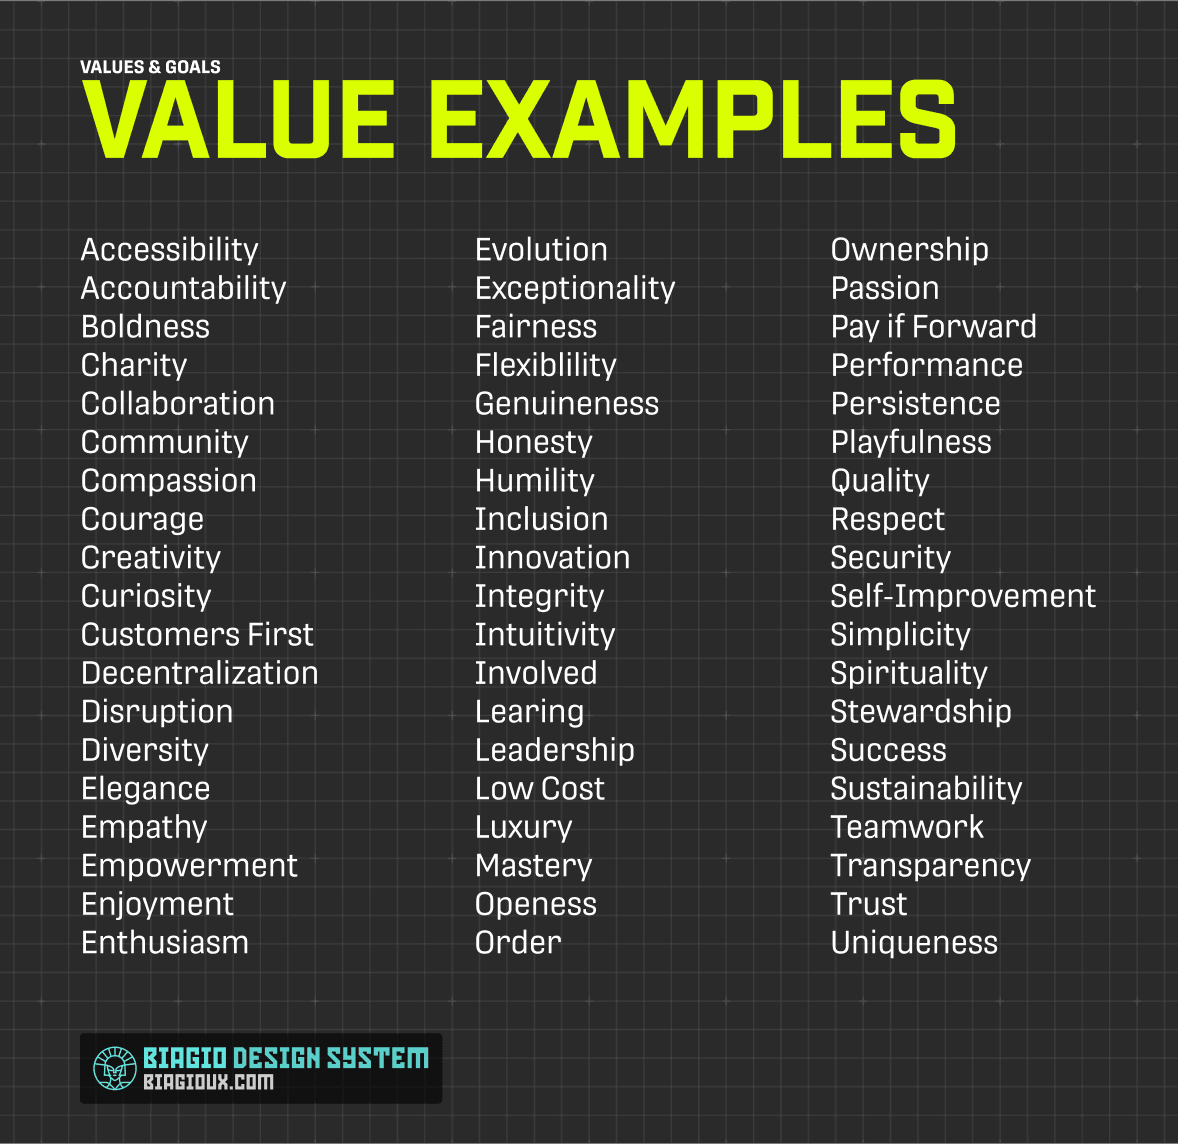 List of value examples